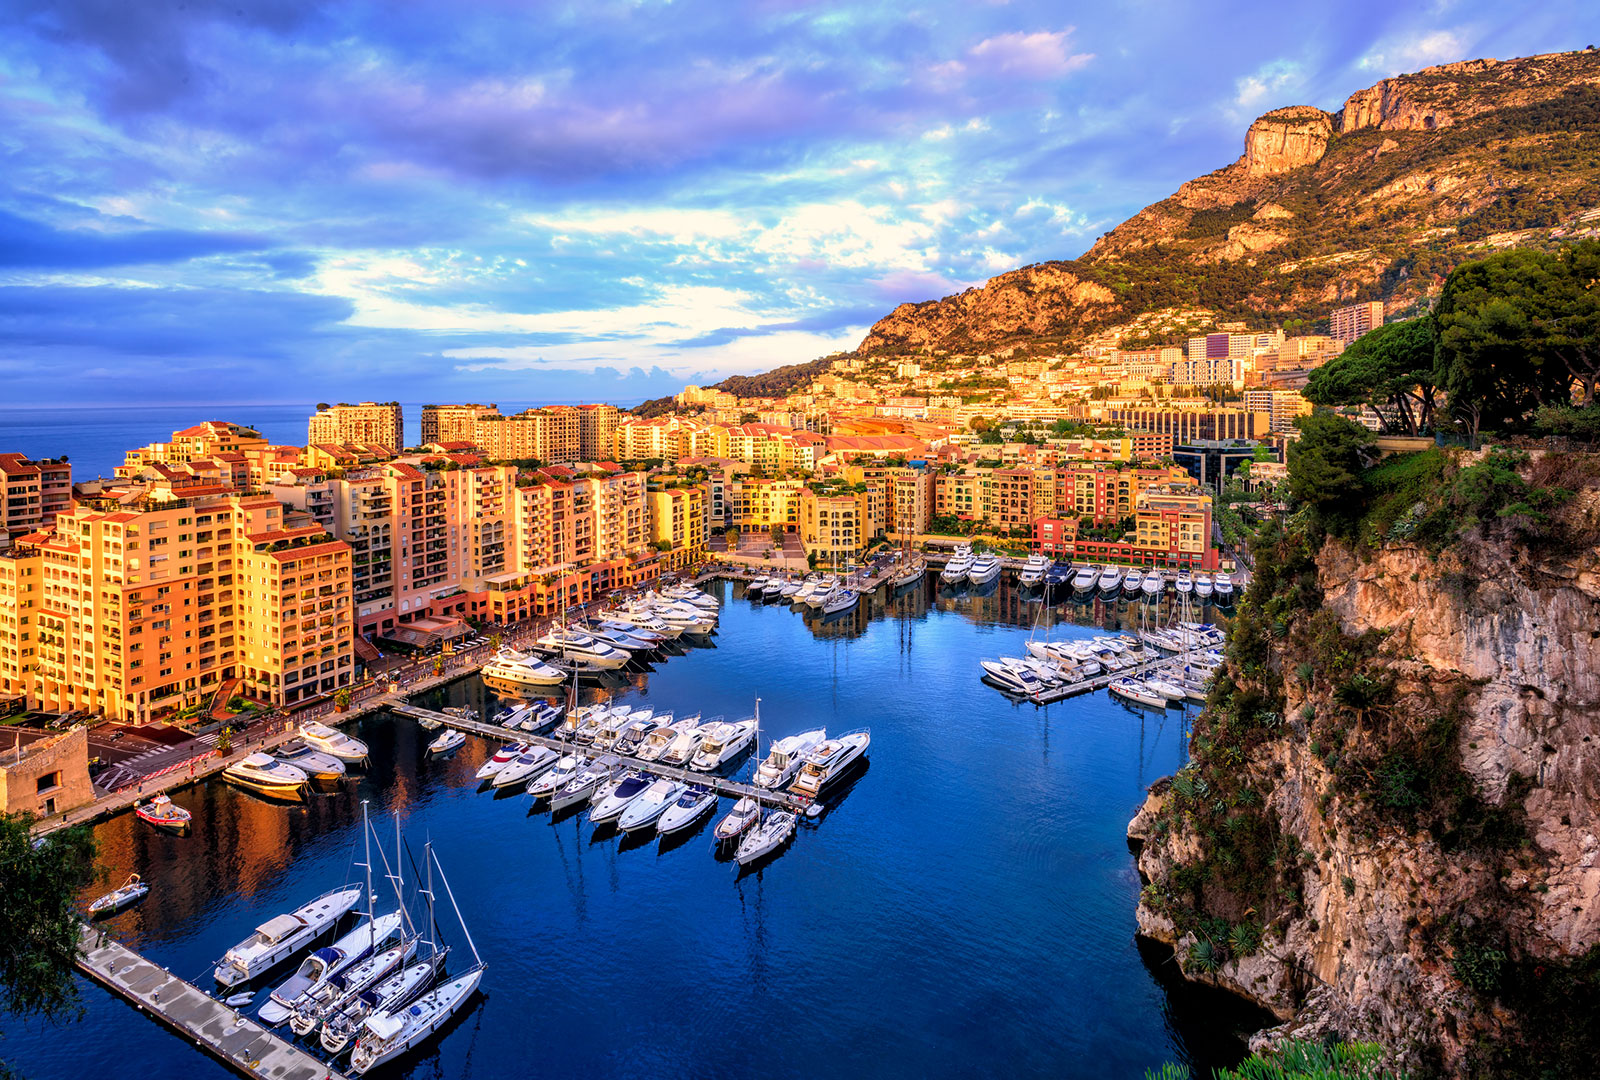 🗺 Can You Locate 18/24 of These Countries in the World? Monaco